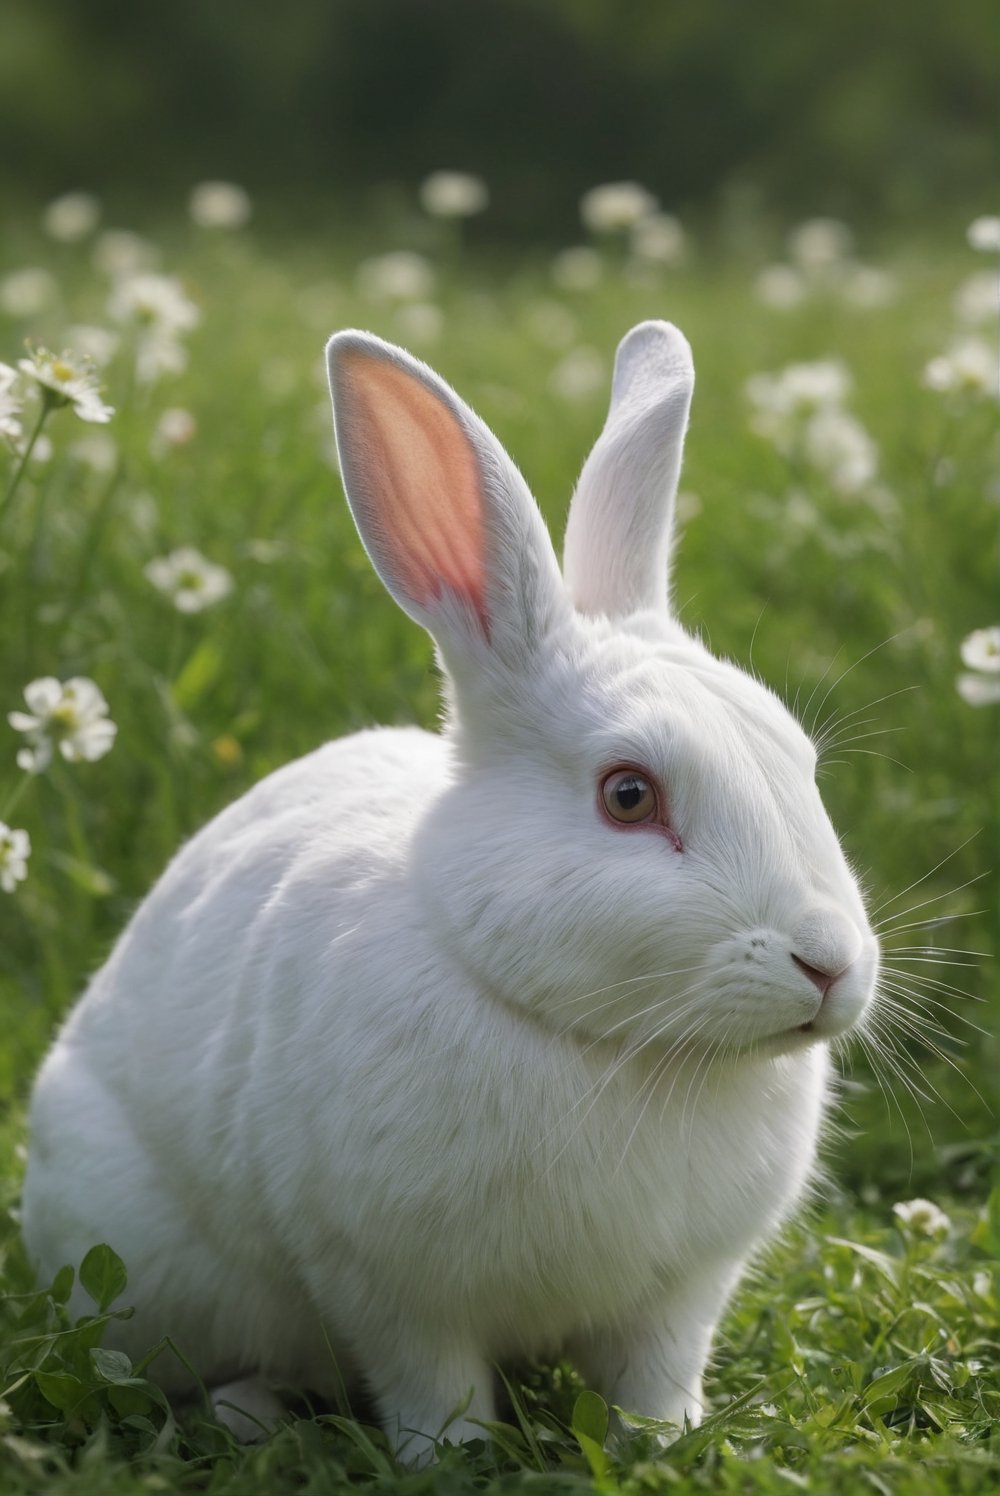 
Hyperrealistic photo of a very realistic white rabbit. The rabbit is in a very green meadow. The rabbit is attentive to movement, on alert. The rabbit is facing forward, on its hind legs. The meadow has many flowers. It is day. The light enters between the leaves and gives a contrast of shadows on the animal. Beautiful scene, ultra detailed, hyperrealistic, colorful, distant.